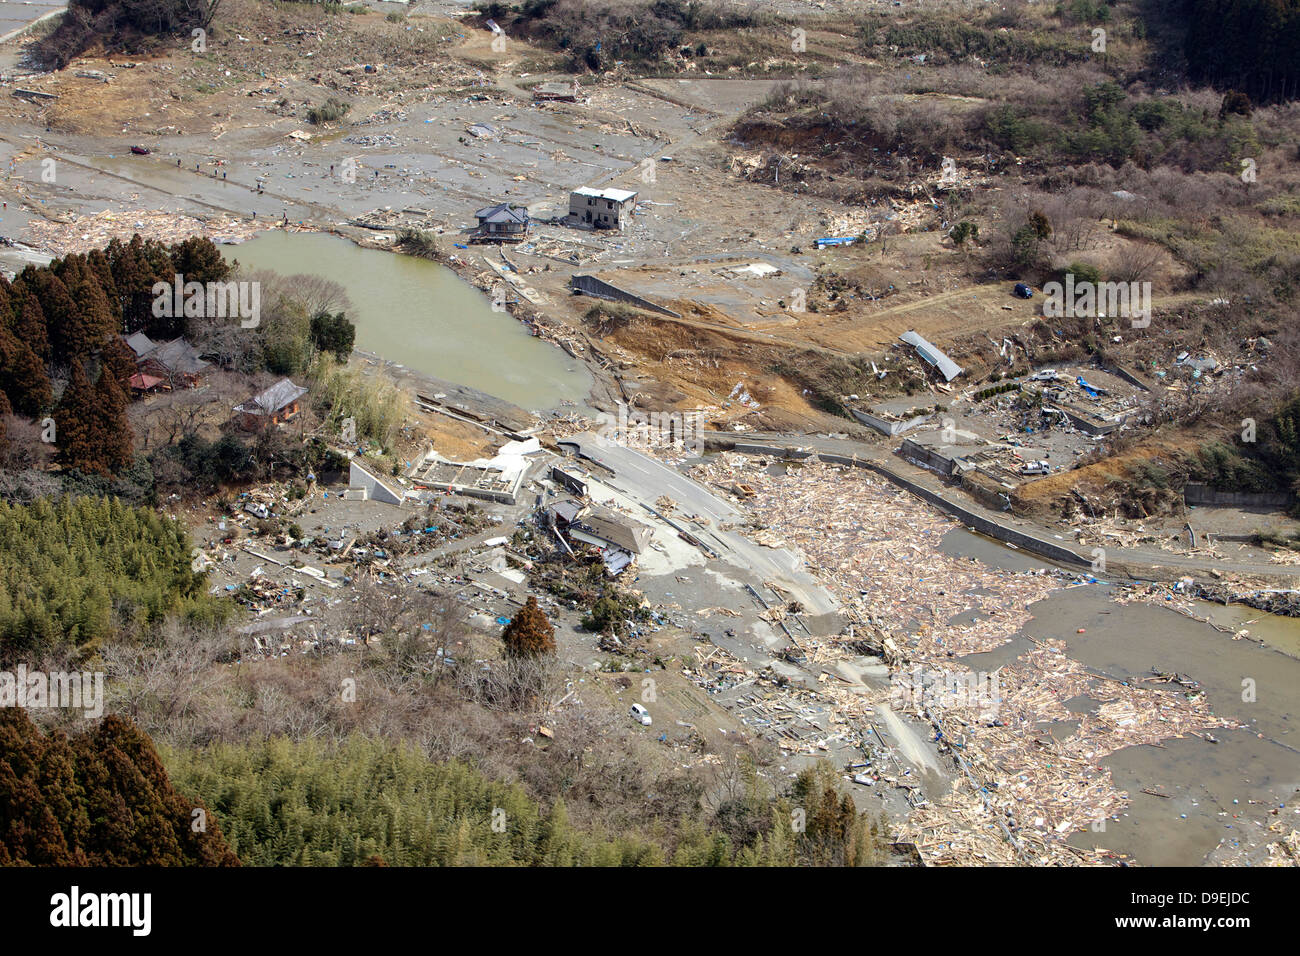 An aerial view of Minato, Japan after a 9.0 earthquake and tsunami. Stock Photo